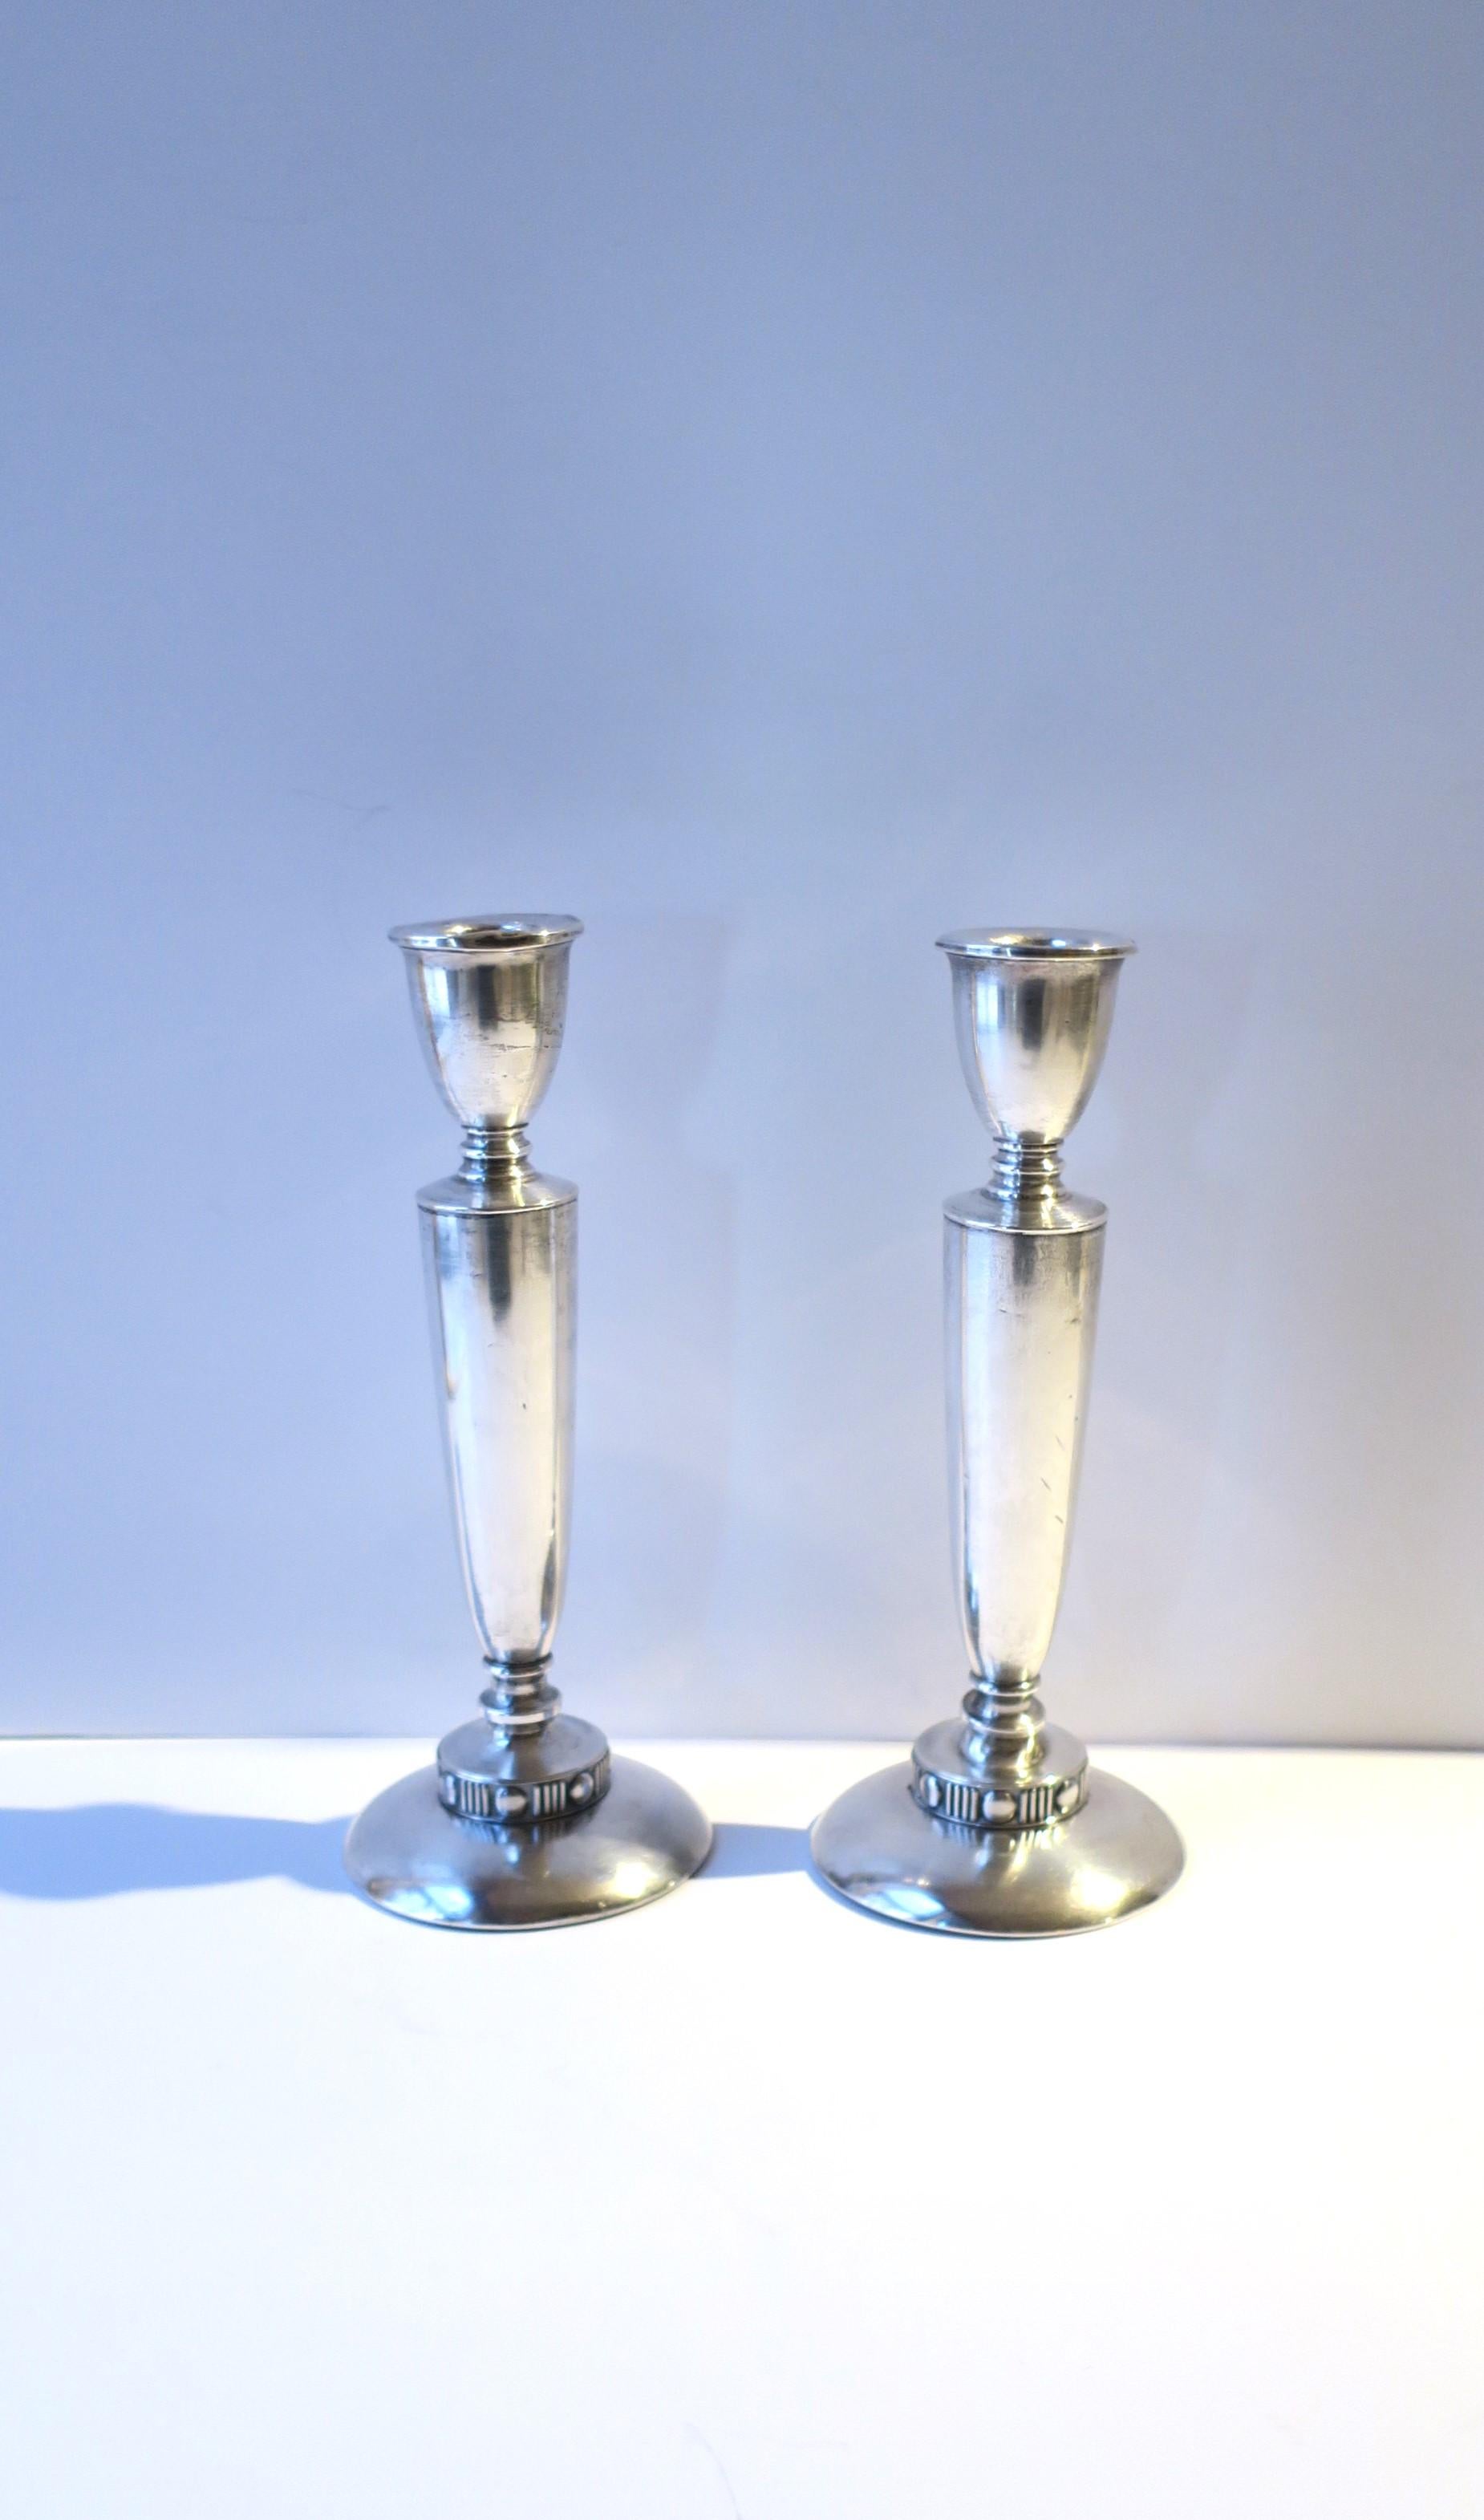 A pair of sterling silver candlestick holders, Art Deco period, circa early-20th century, New York, USA. Pair are strong and well made. Marked 'Sterling' on bottom of both as shown in last two images. Dimensions: 3.88